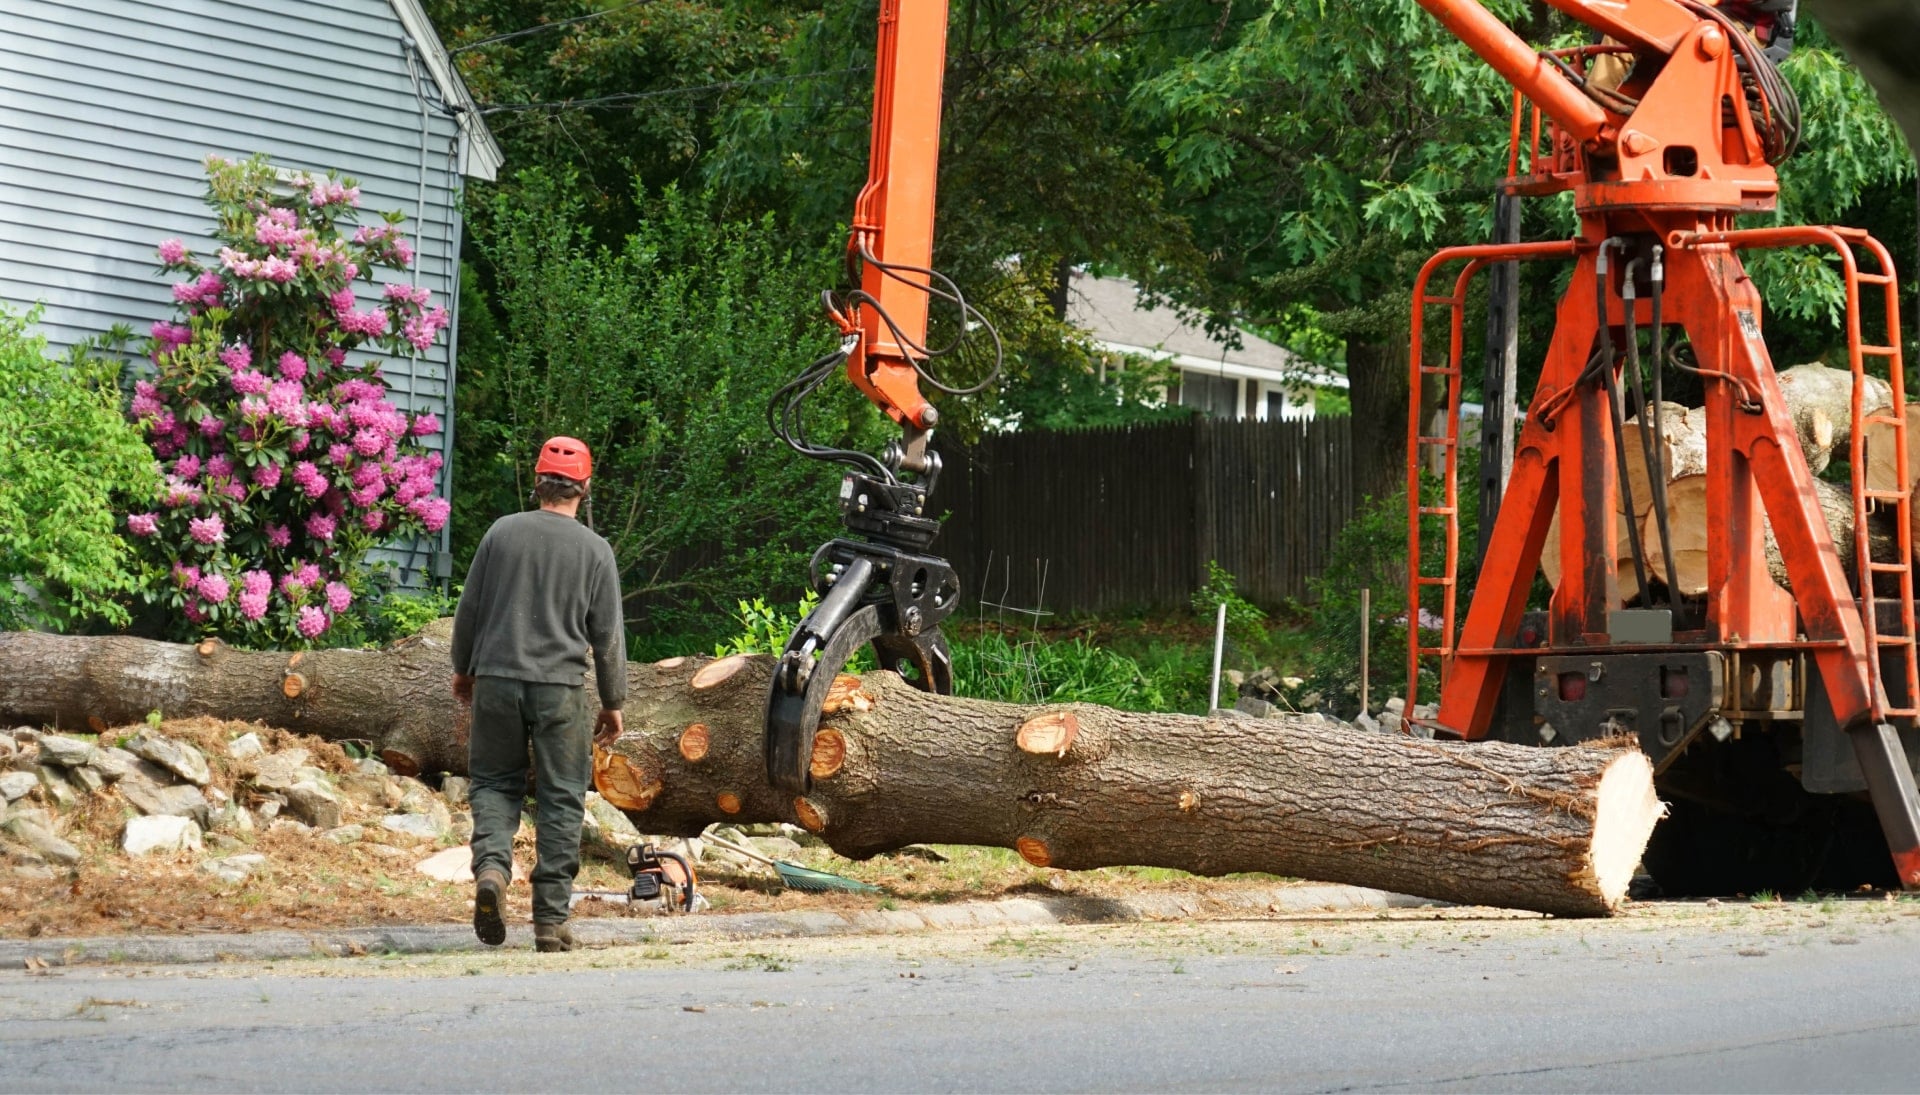 Local partner for Tree removal services in Vacaville